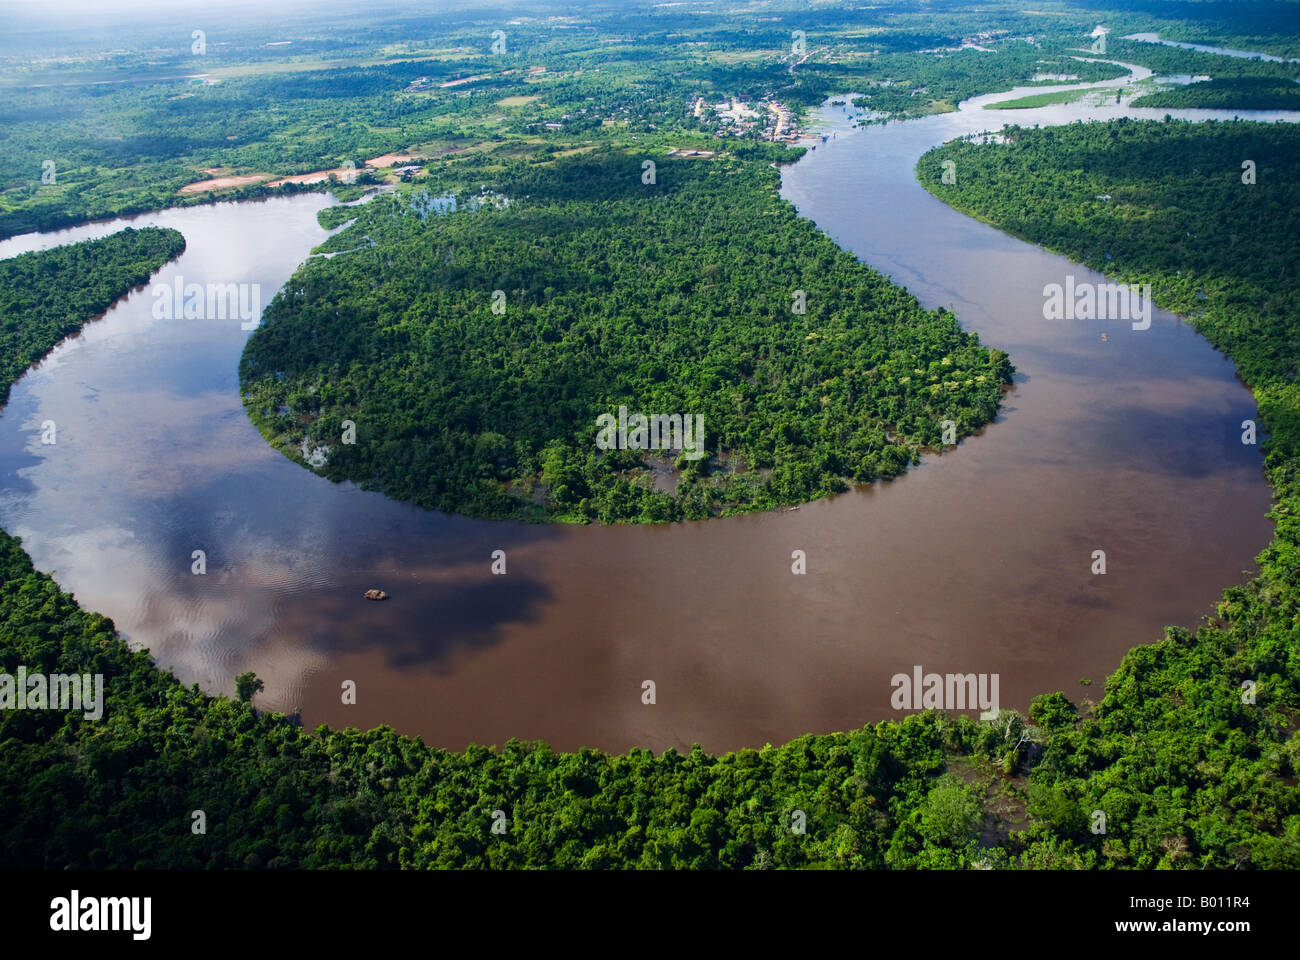 Peru, Amazon, Amazon River. Bends in the Nanay River, a Tributary of the Amazon River. Stock Photo